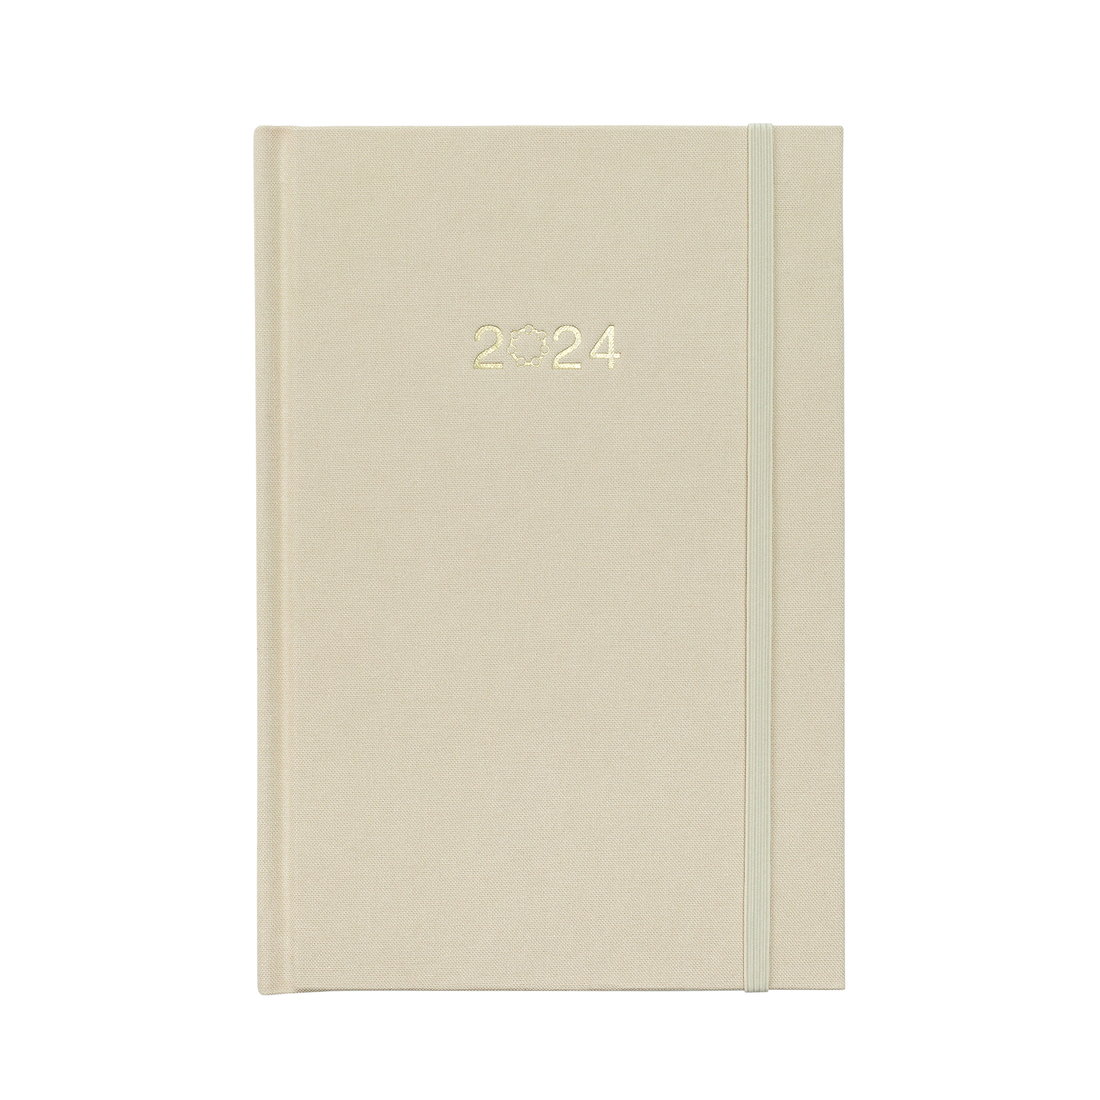  A beautiful beige linen planner with 2024 on the cover and a matching beige elastic closure